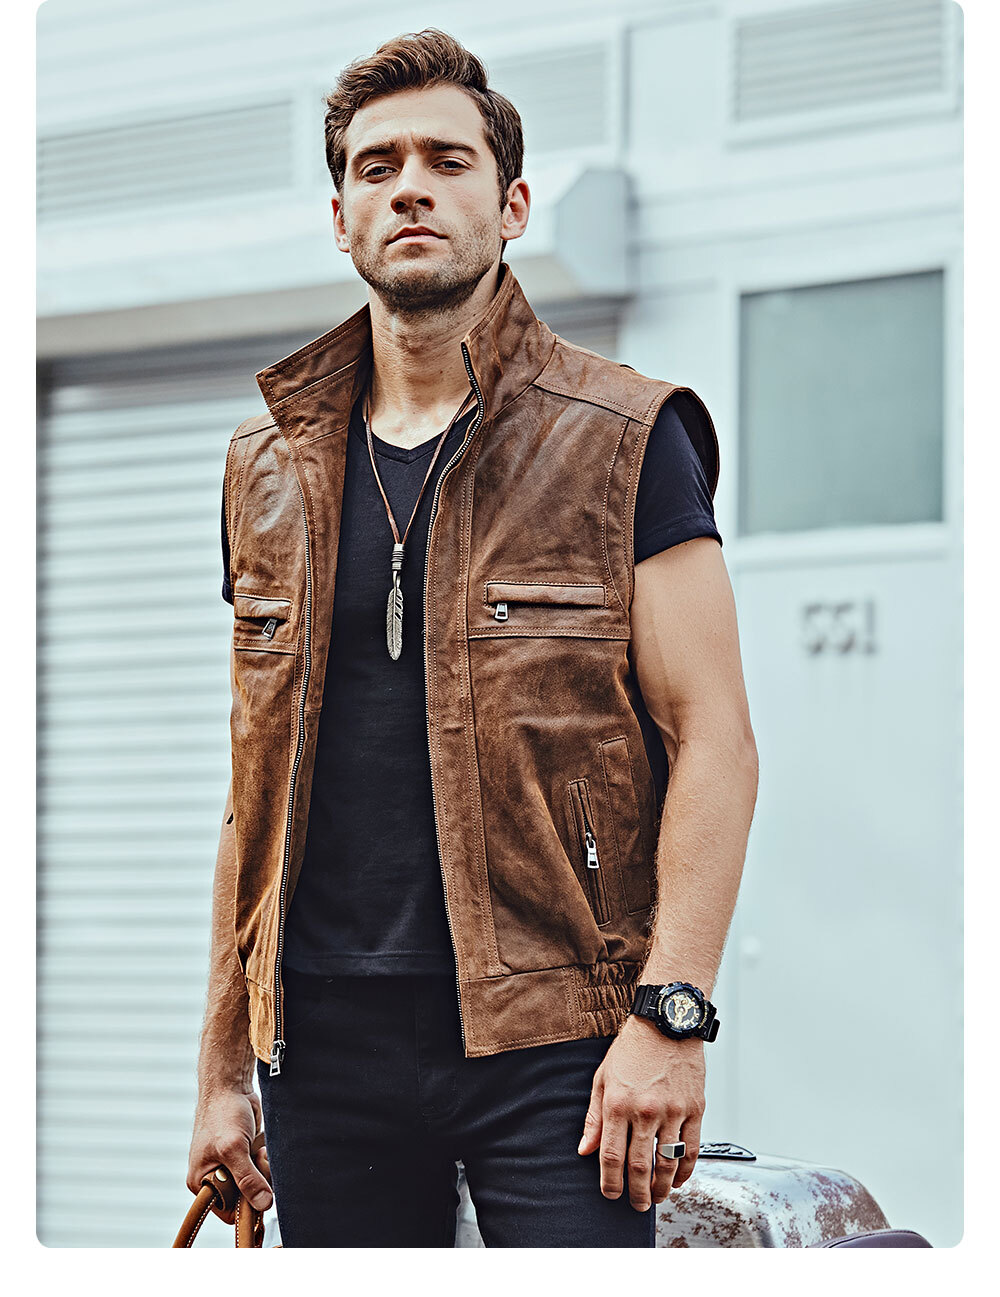 Men's Leather Retro Vest Stand Collar Zippered MXGX278 Stand collar flavor leather motorcycle jacket brands| fashion stand collar flavor leather motorcycle jacket